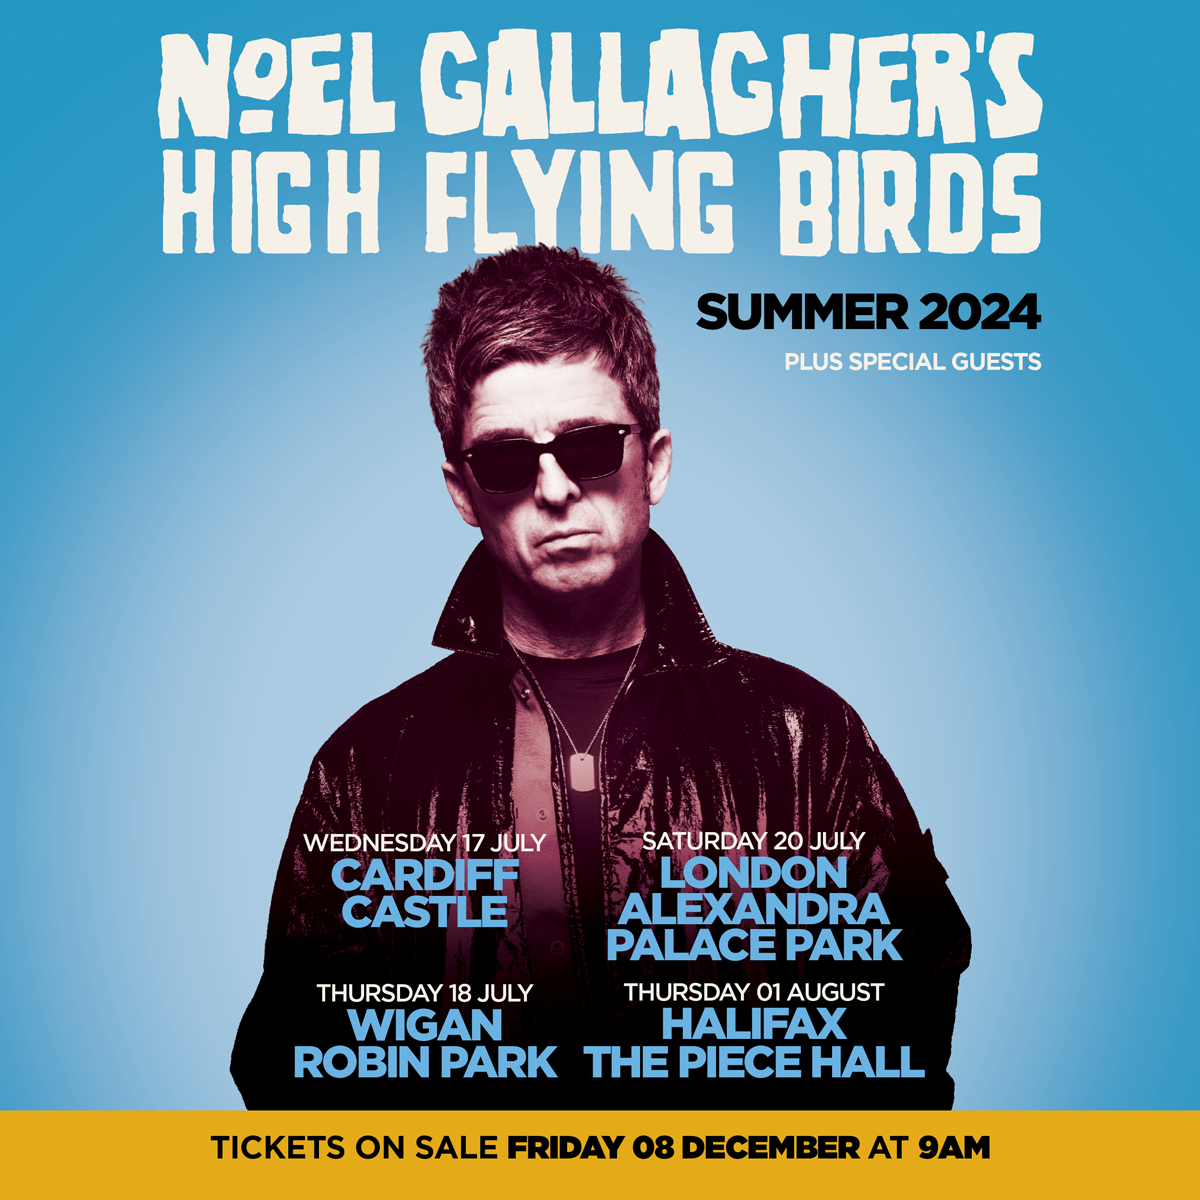 Noel Gallagher's High Flying Birds at The Piece Hall Halifax Tickets